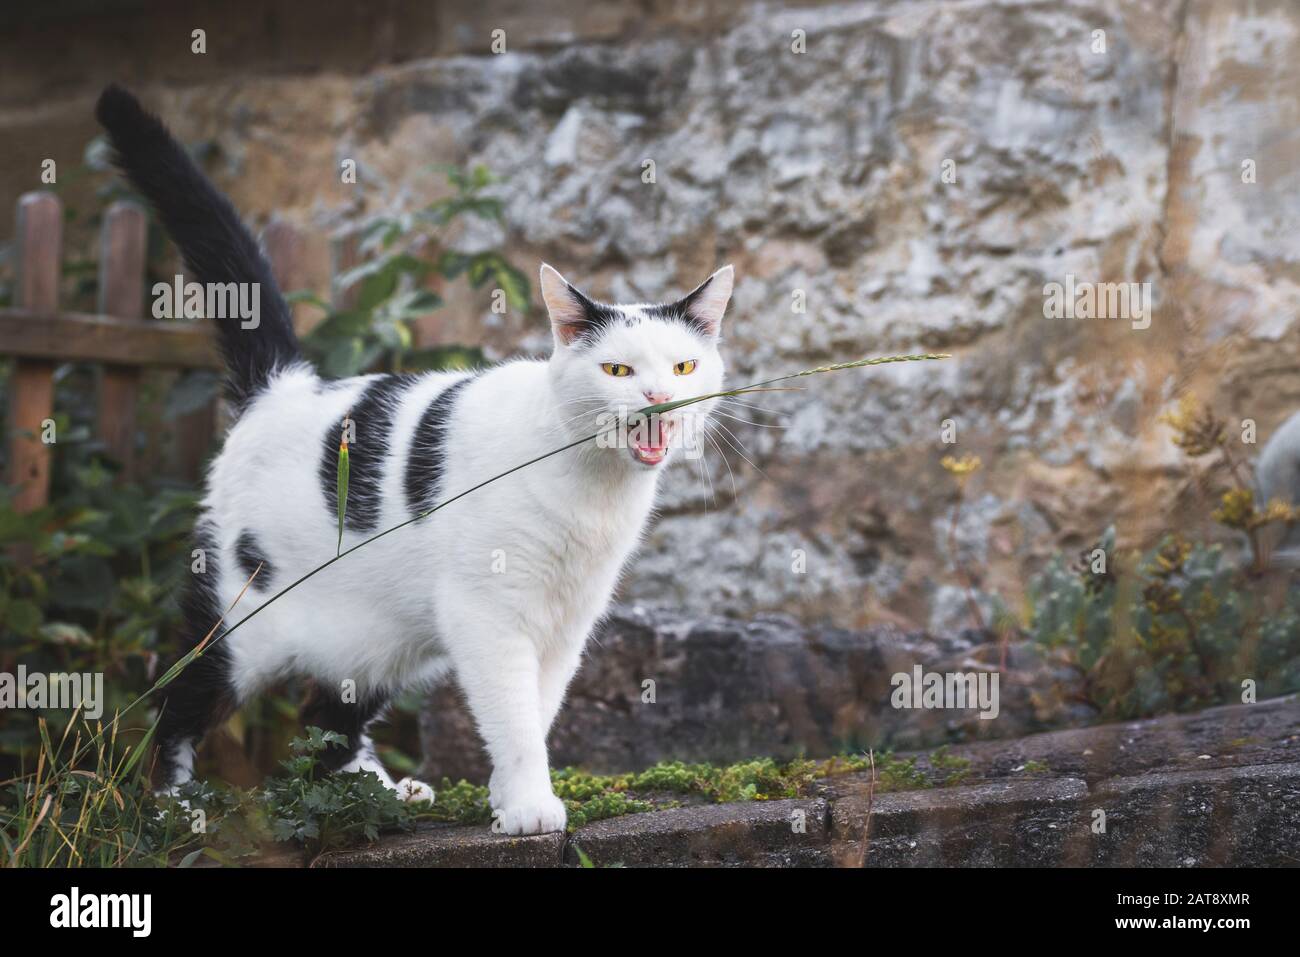 Wicked cat biting a grass thread and staring into the camera. Cat with yellow eyes and open mouth in countryside settings. White cat with black spots Stock Photo